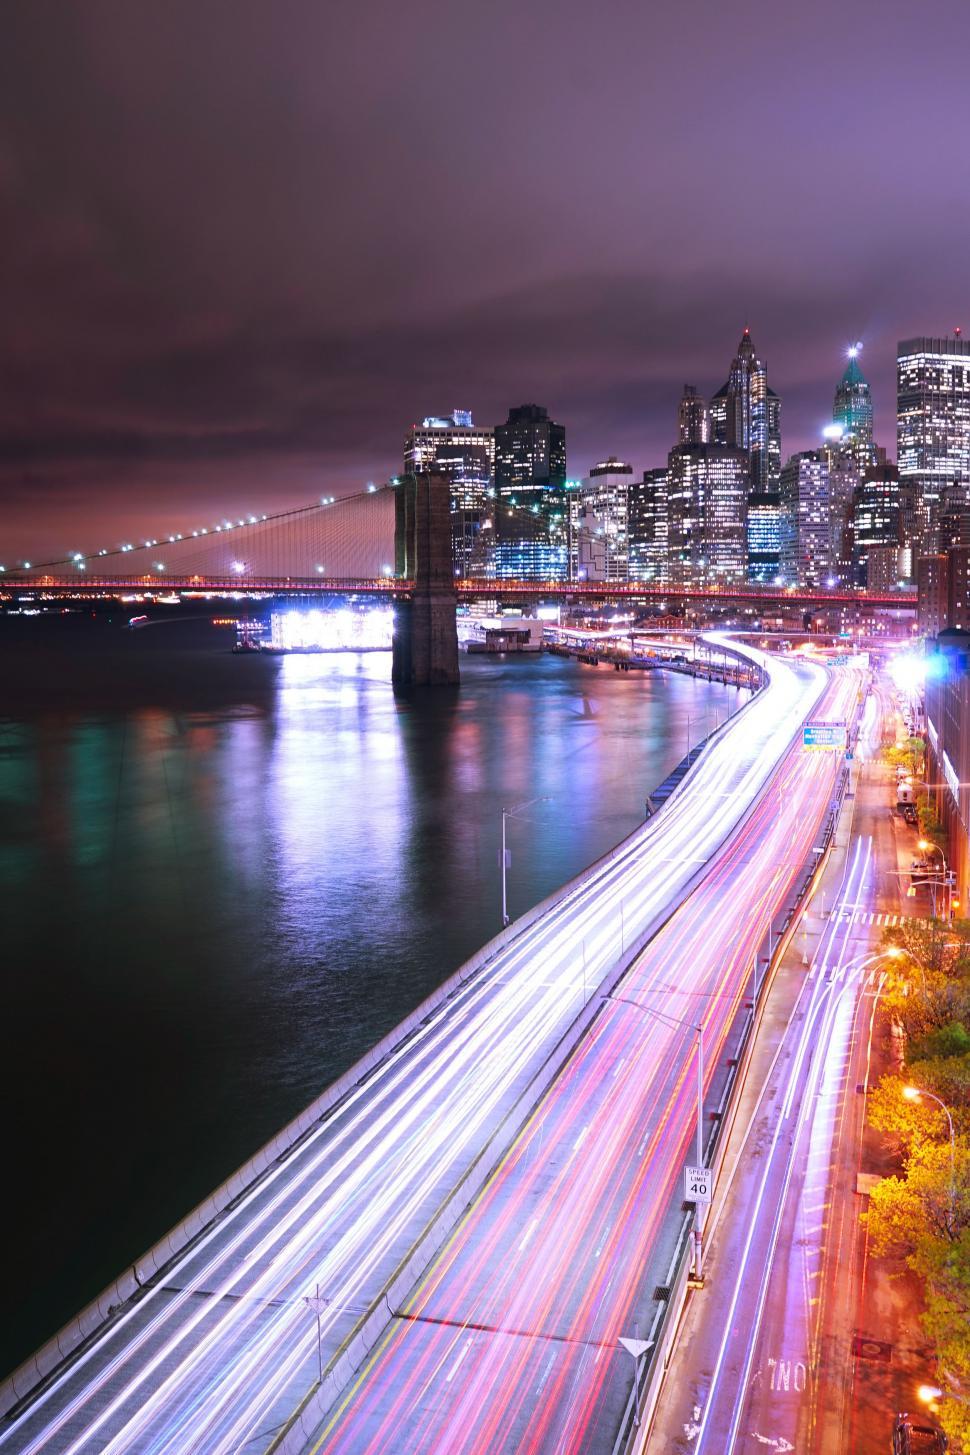 Free Image of Dynamic Cityscape With Long Exposure Lights 